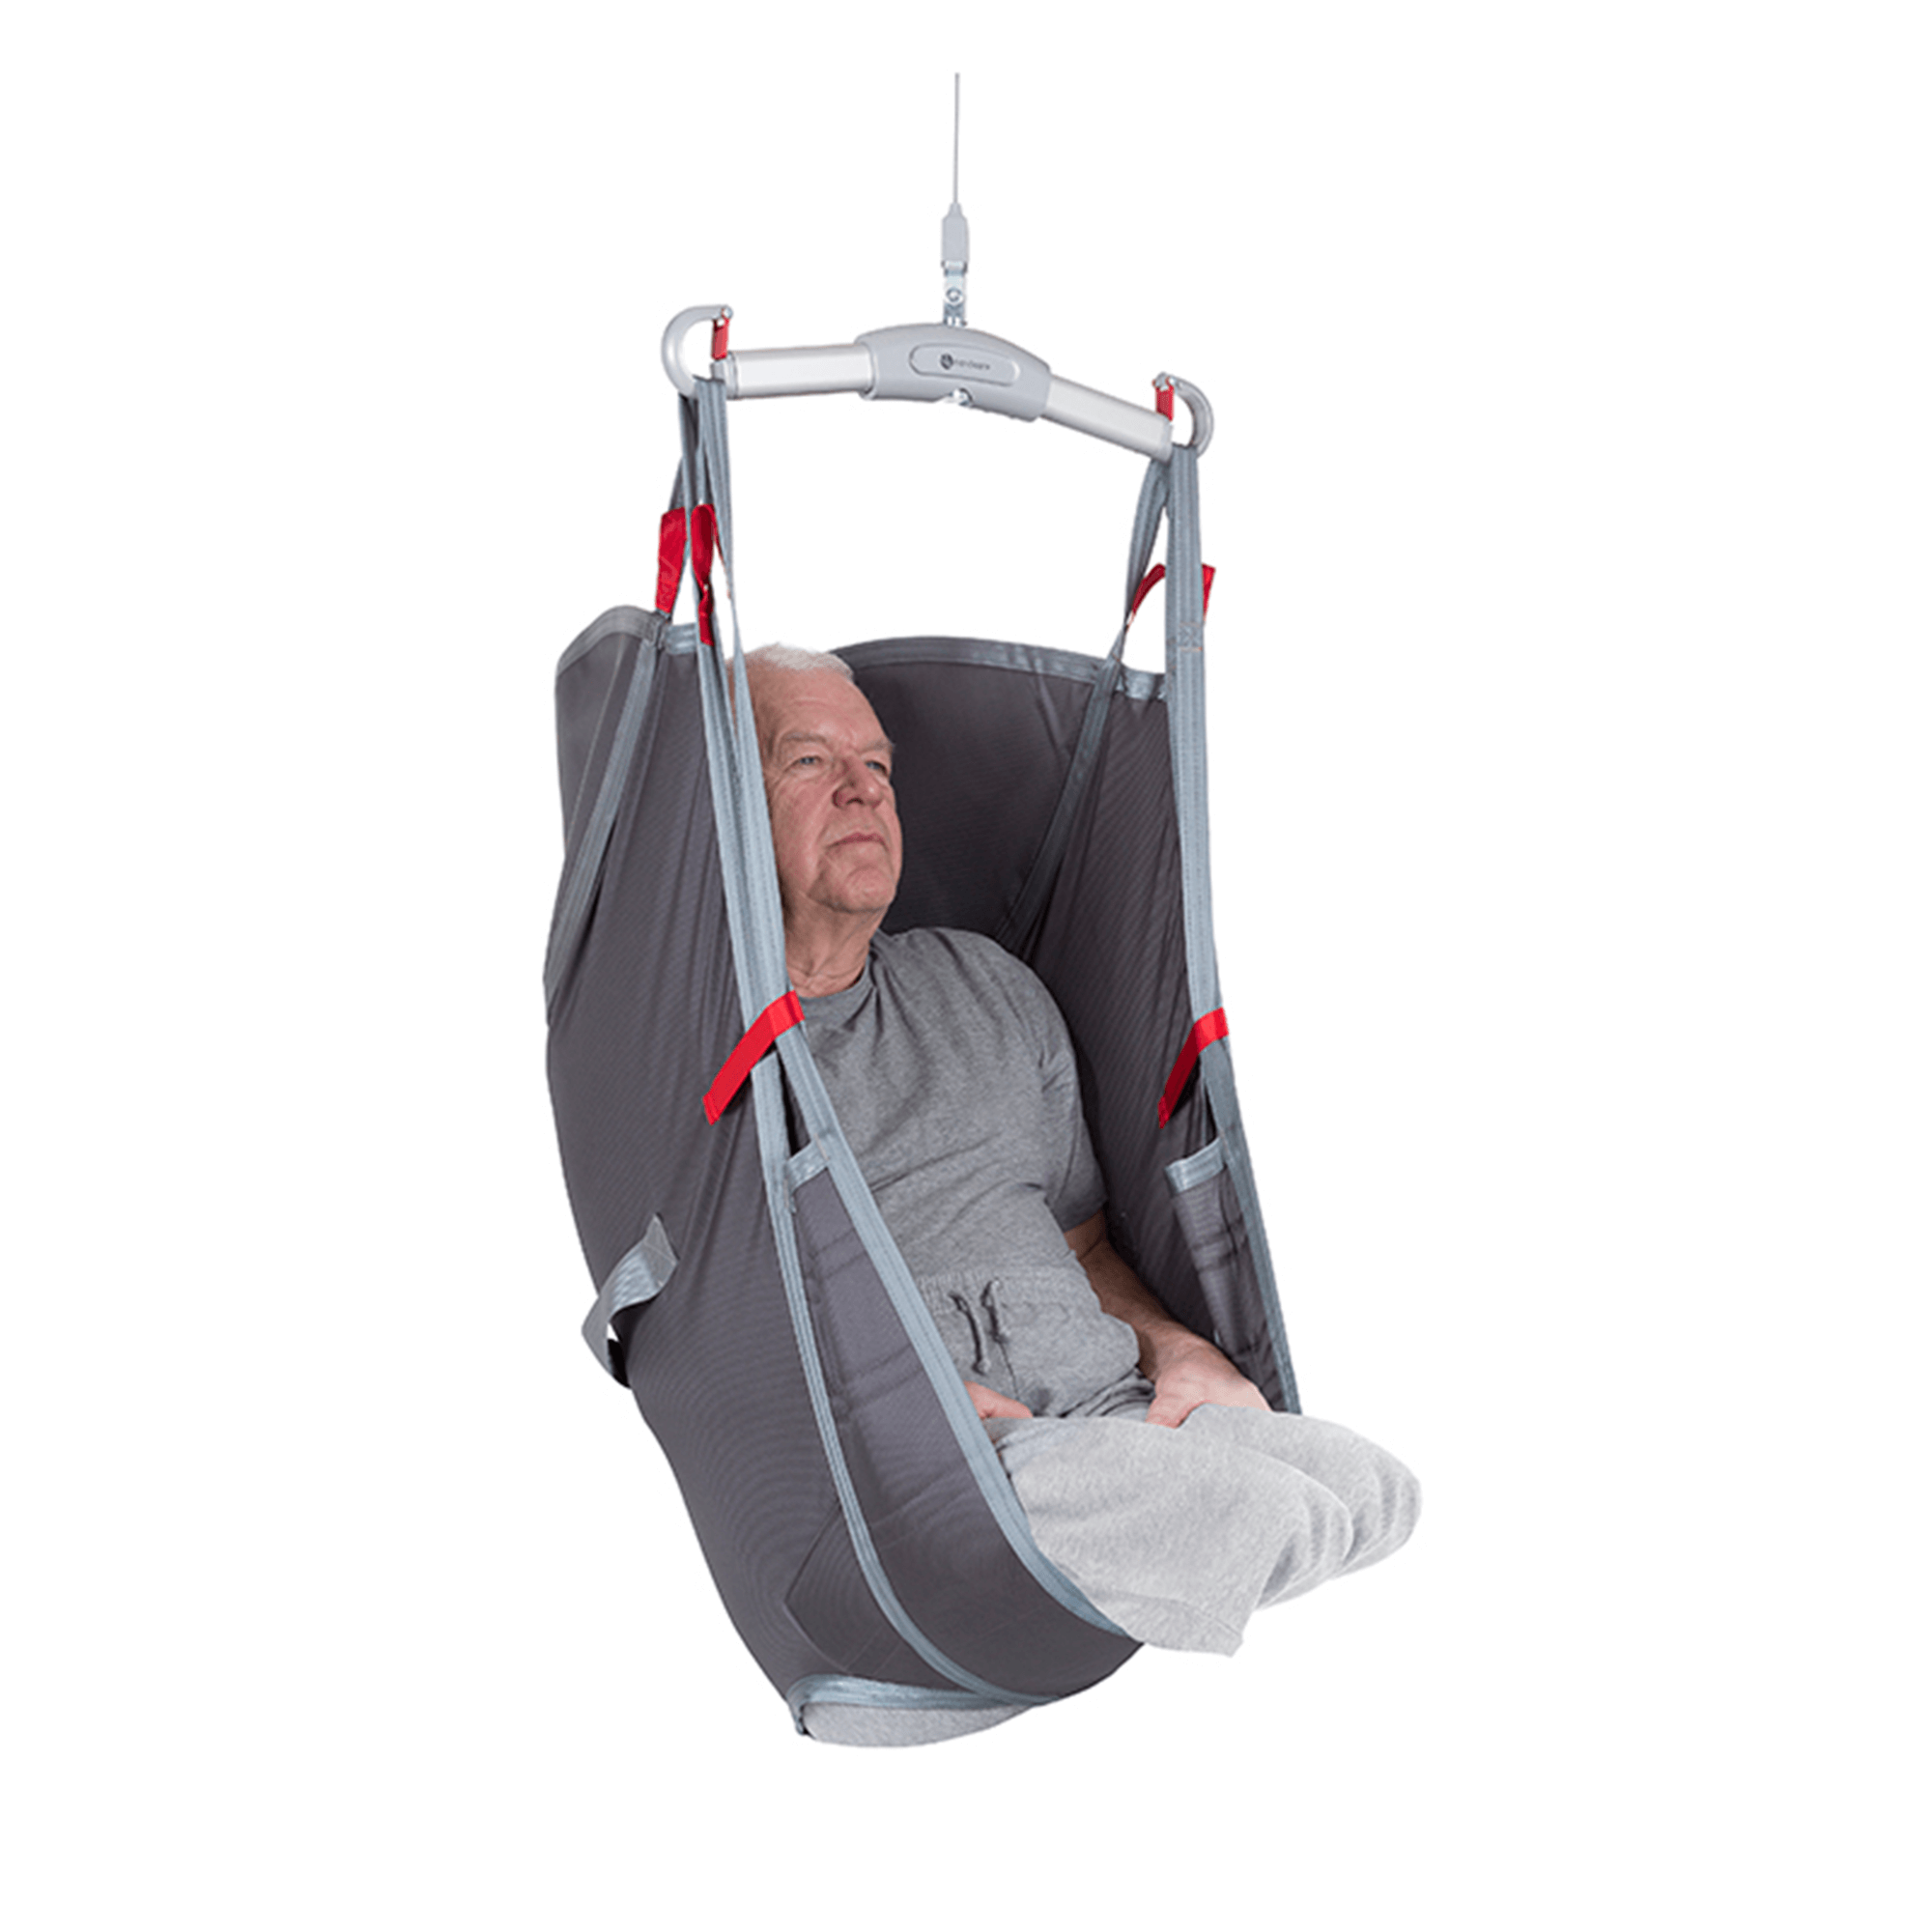 Amputee Sling - Extra Head Support - Universal Patient Lift Sling for Lifts for Home Use - Transfer Safely with Patient Lifter - Compatible with Hoyer Lift - Easy-to-Use